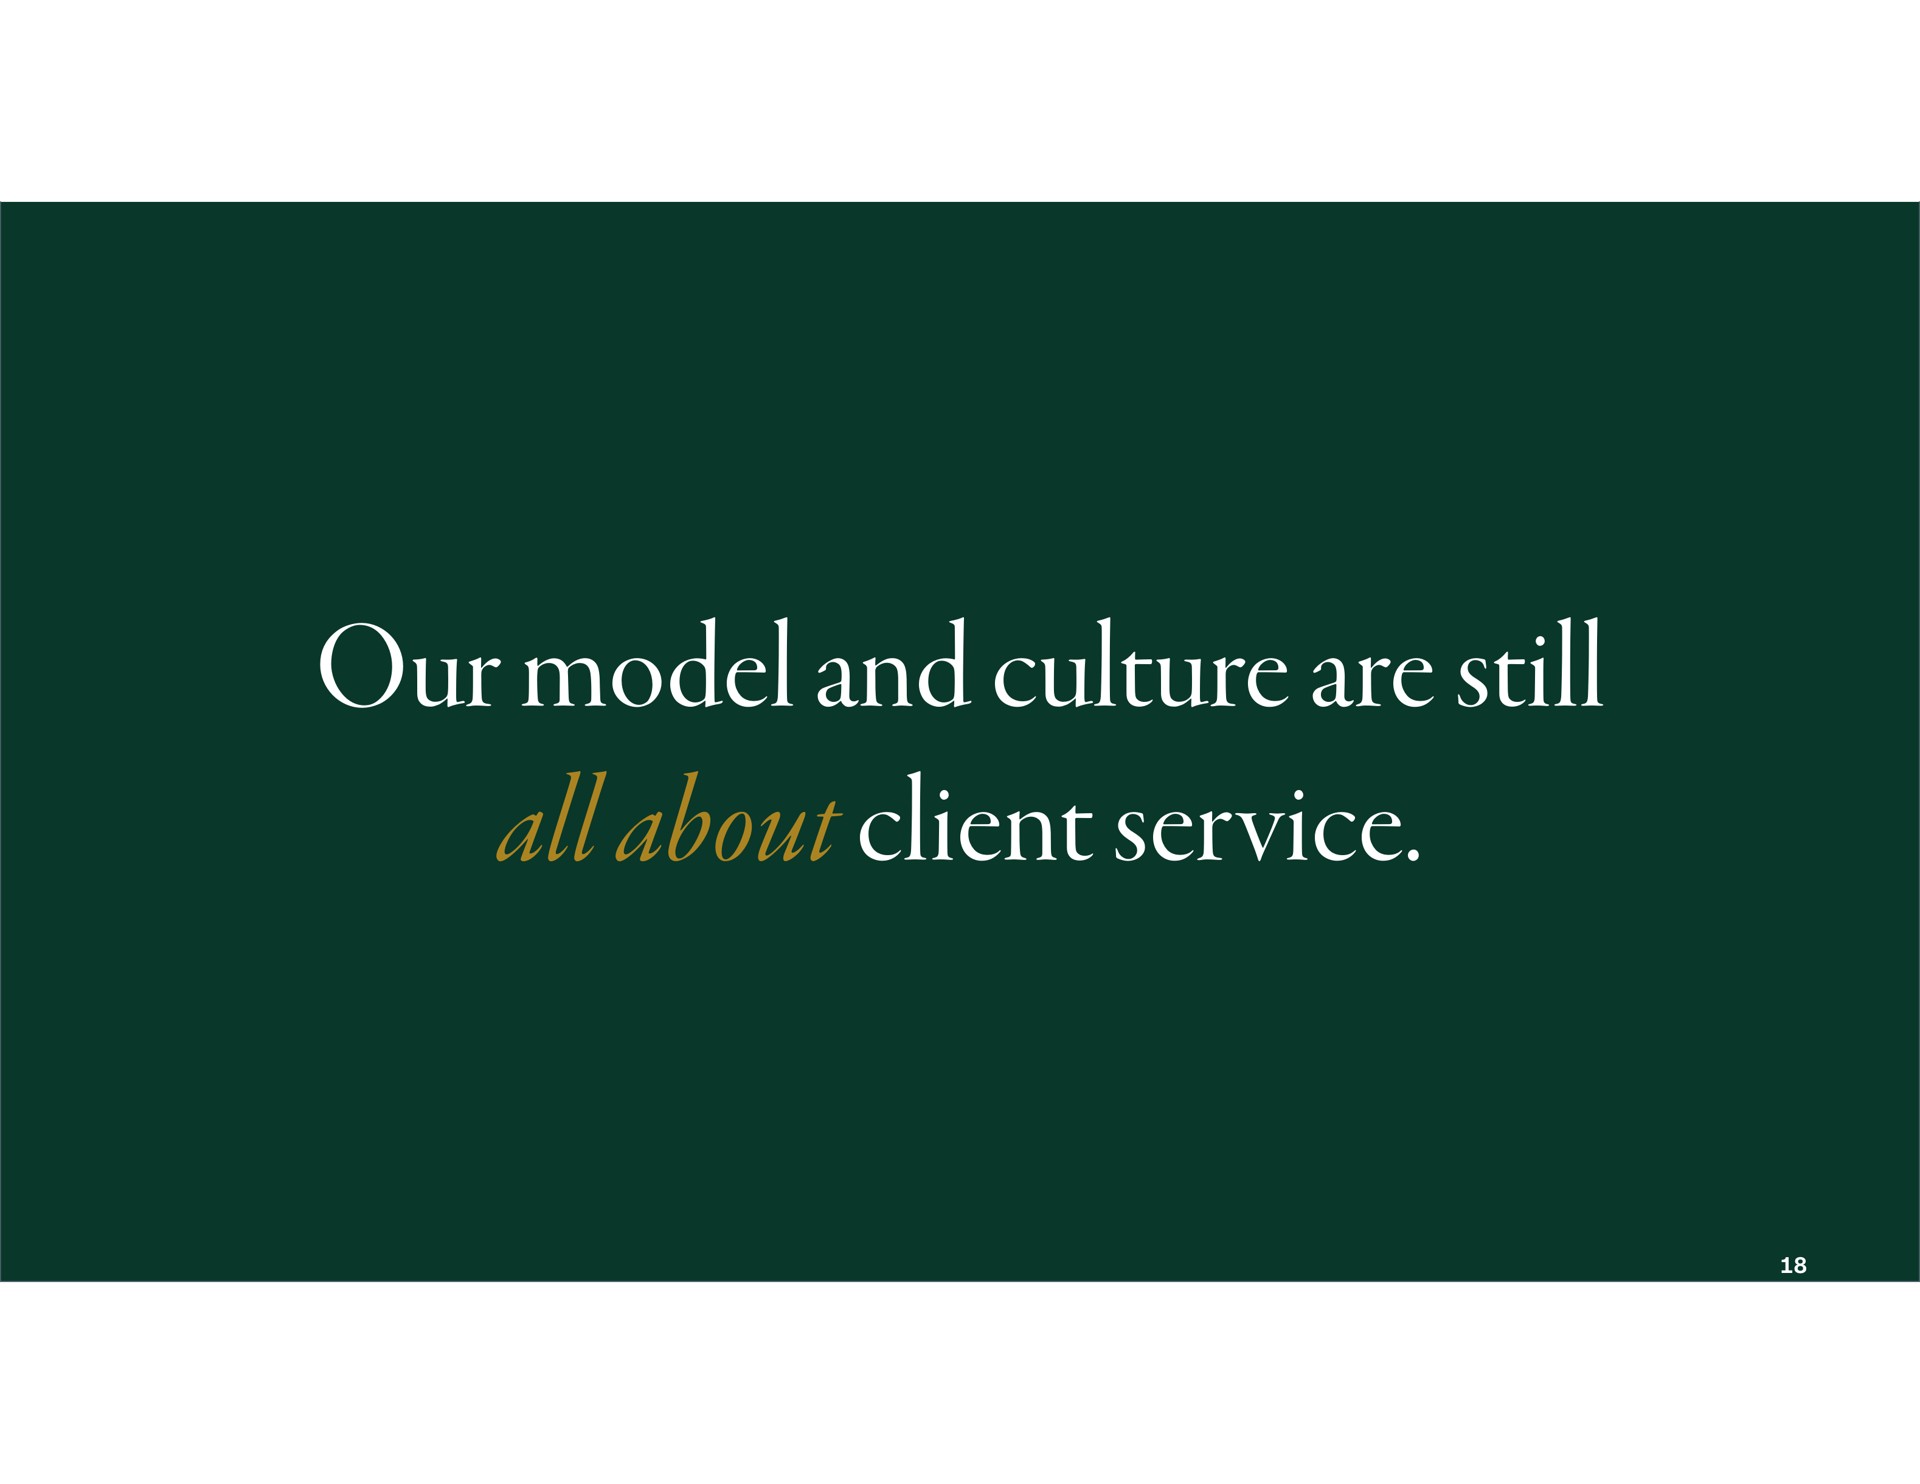 our model and culture are still all about client service | First Republic Bank